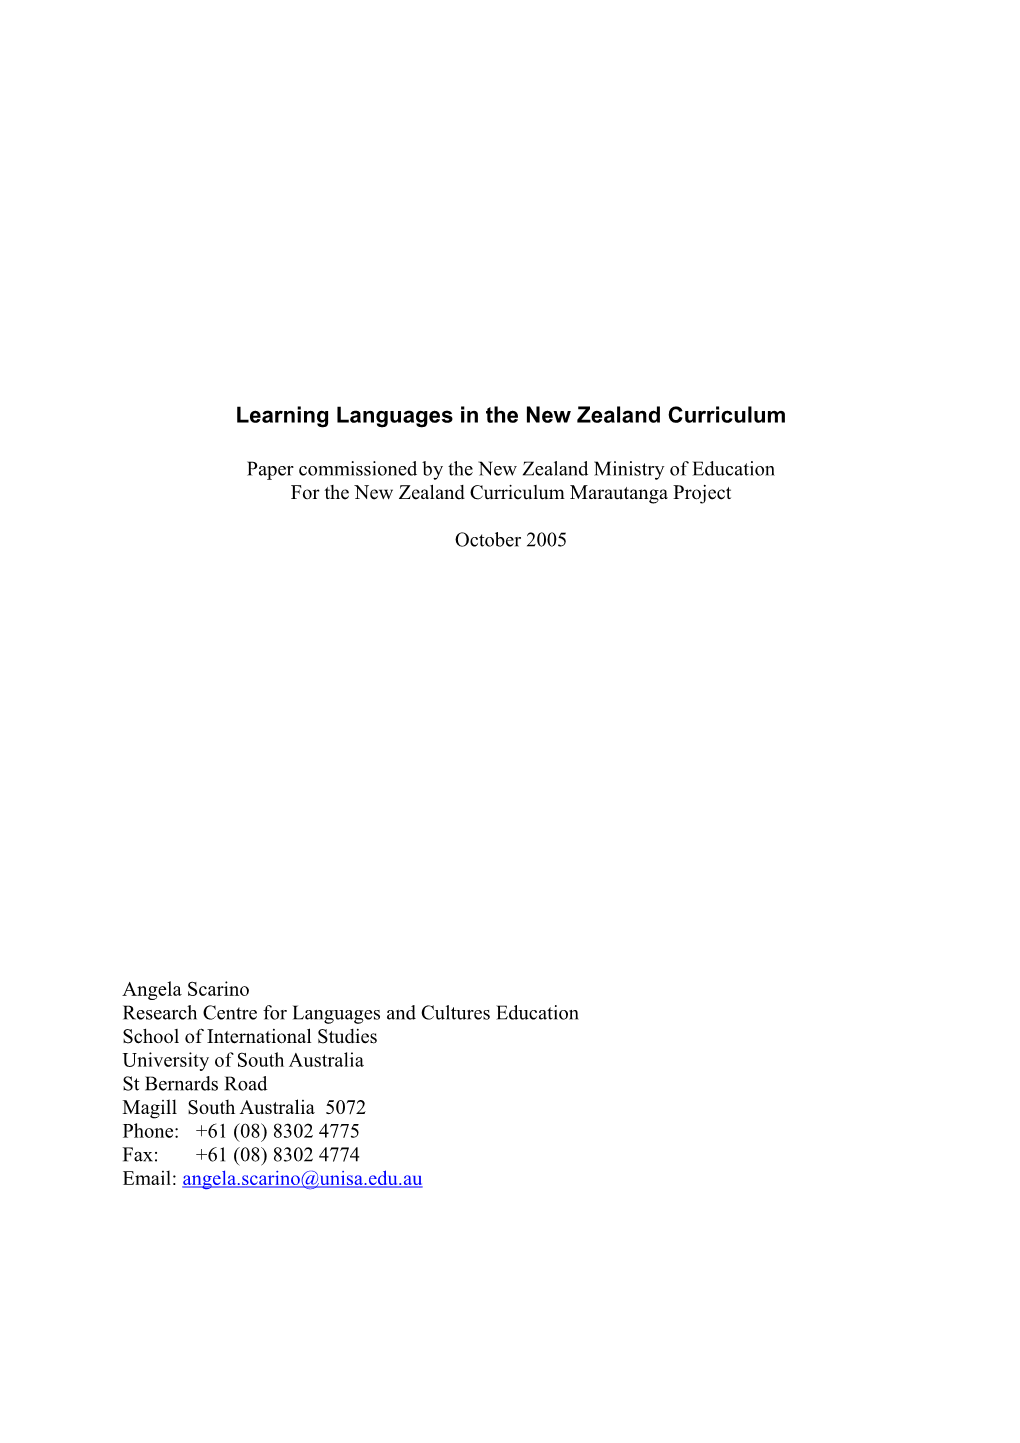 Learning Languages in the New Zealand Curriculum